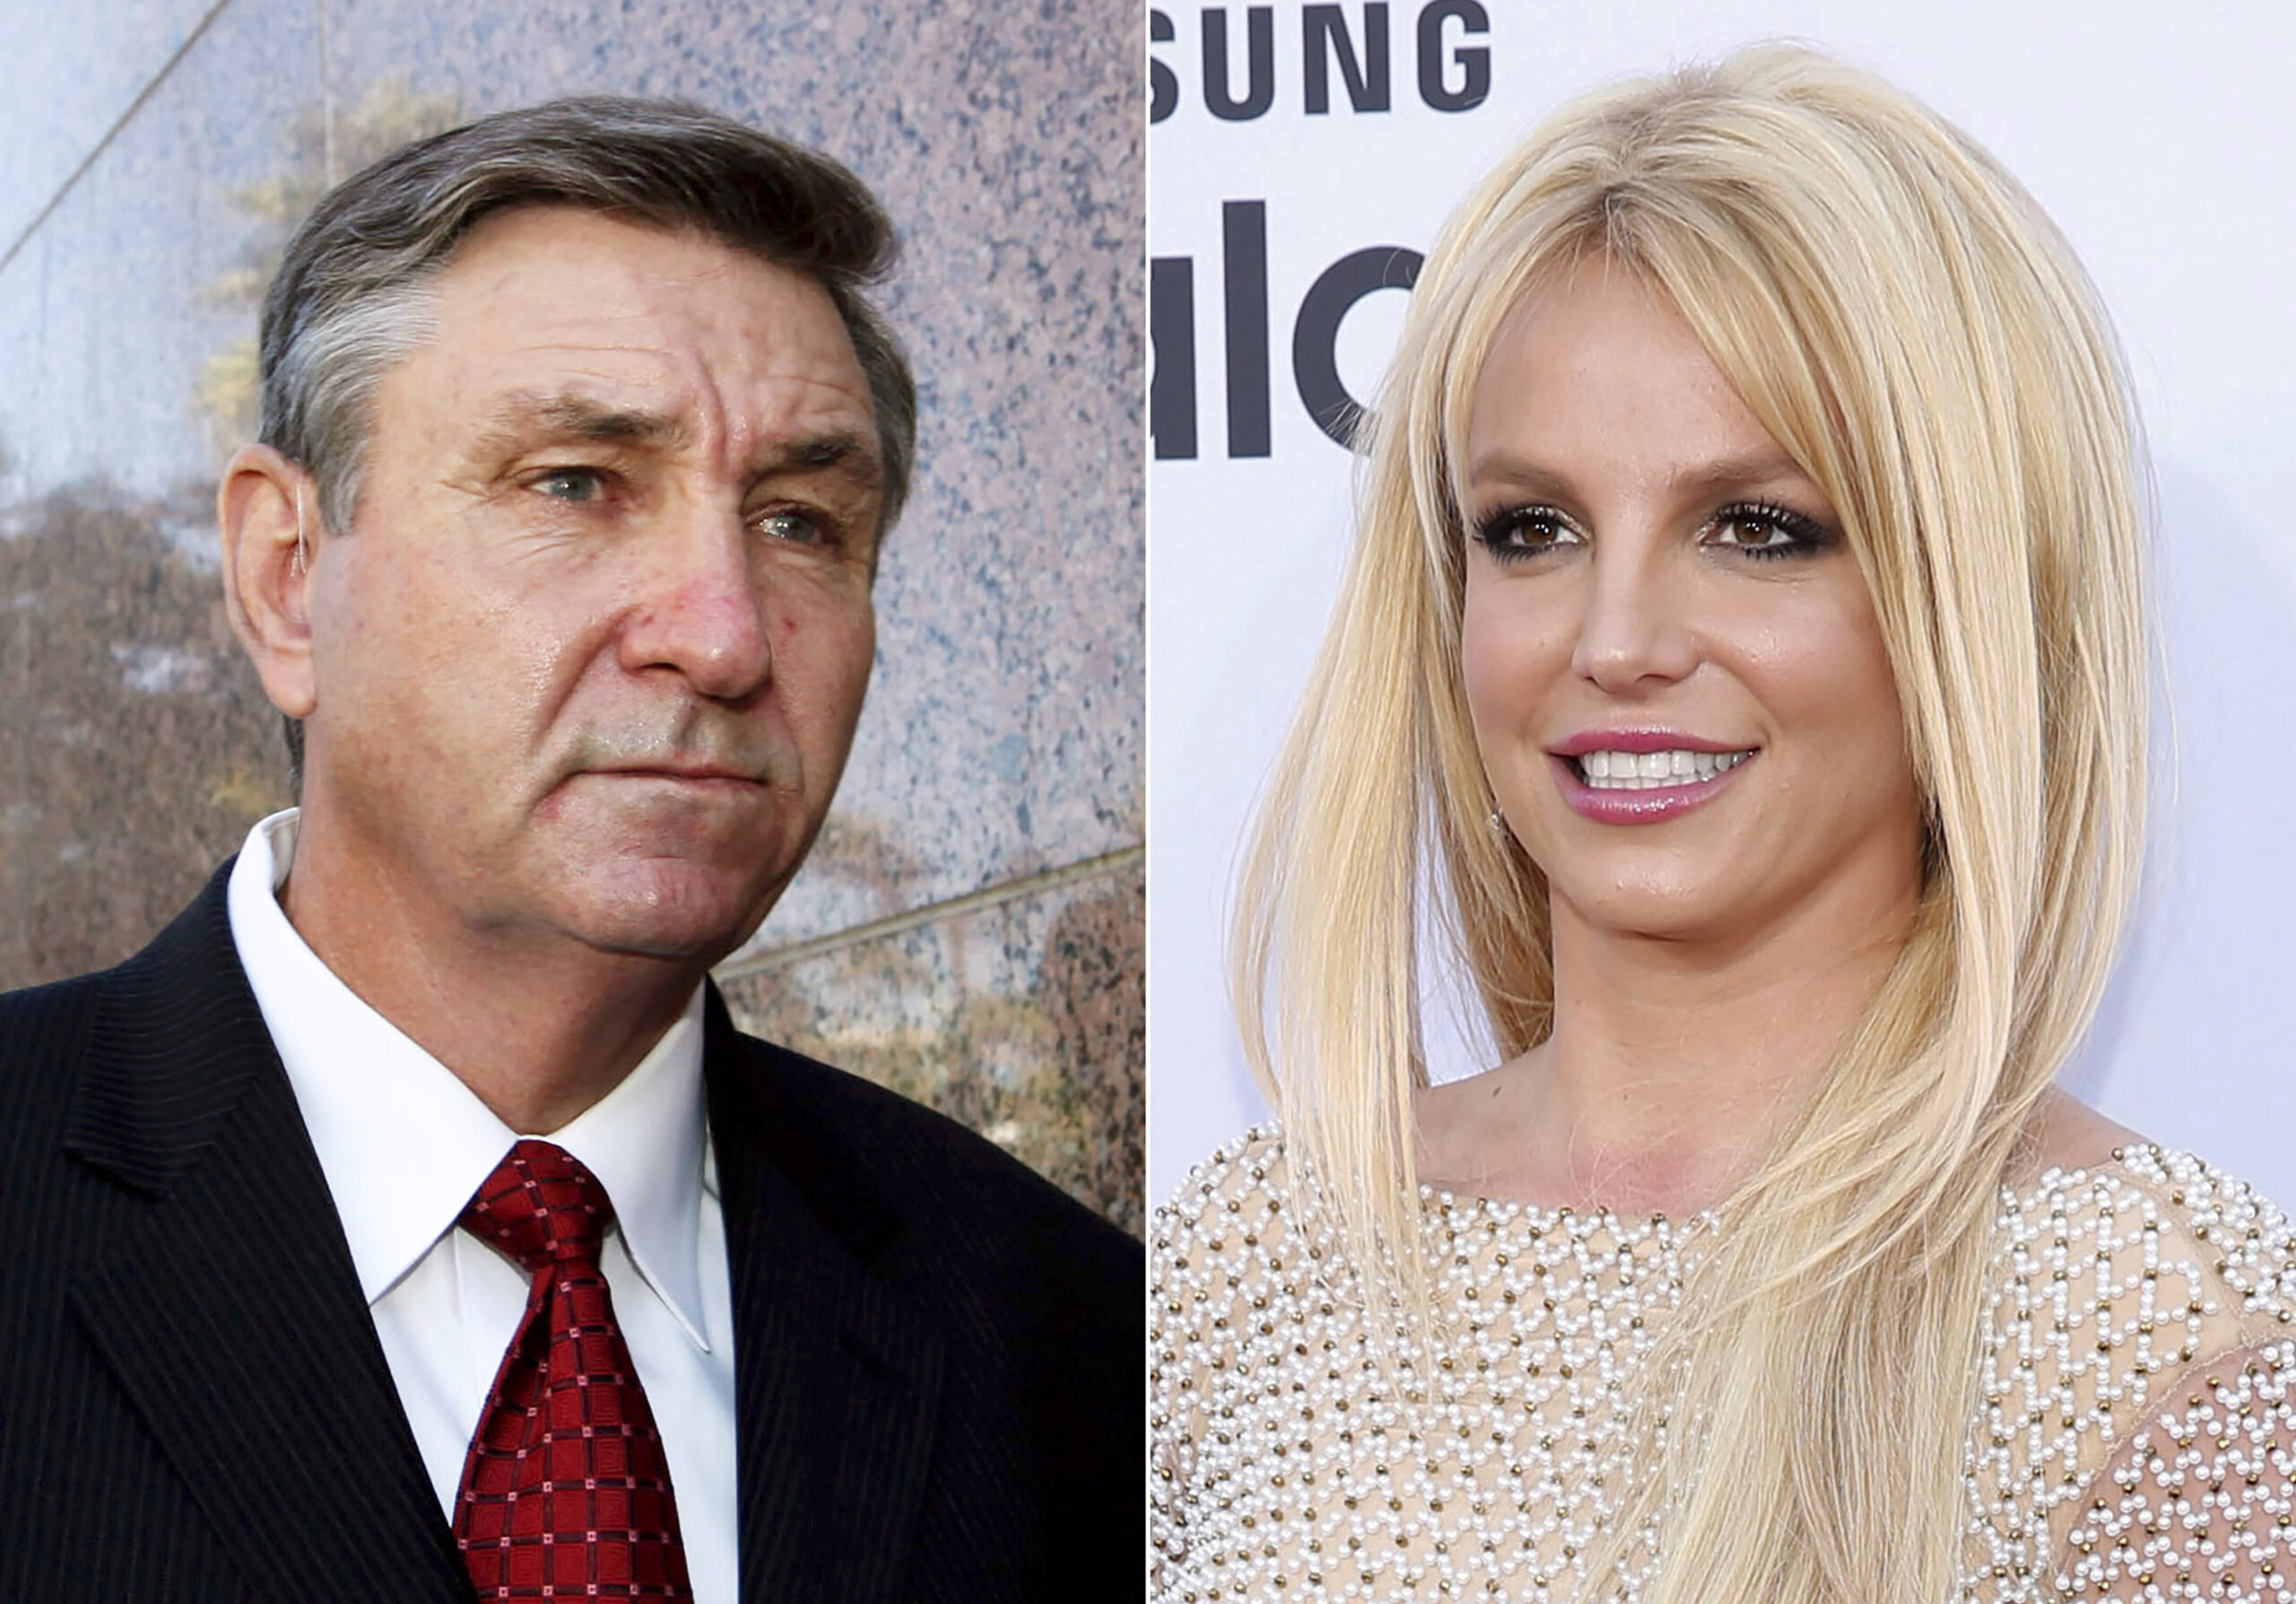 britney-spears'-message-after-ending-the-legal-battle-with-her-father:-“my-family-hurt-me-“there-has-been-no-justice.”